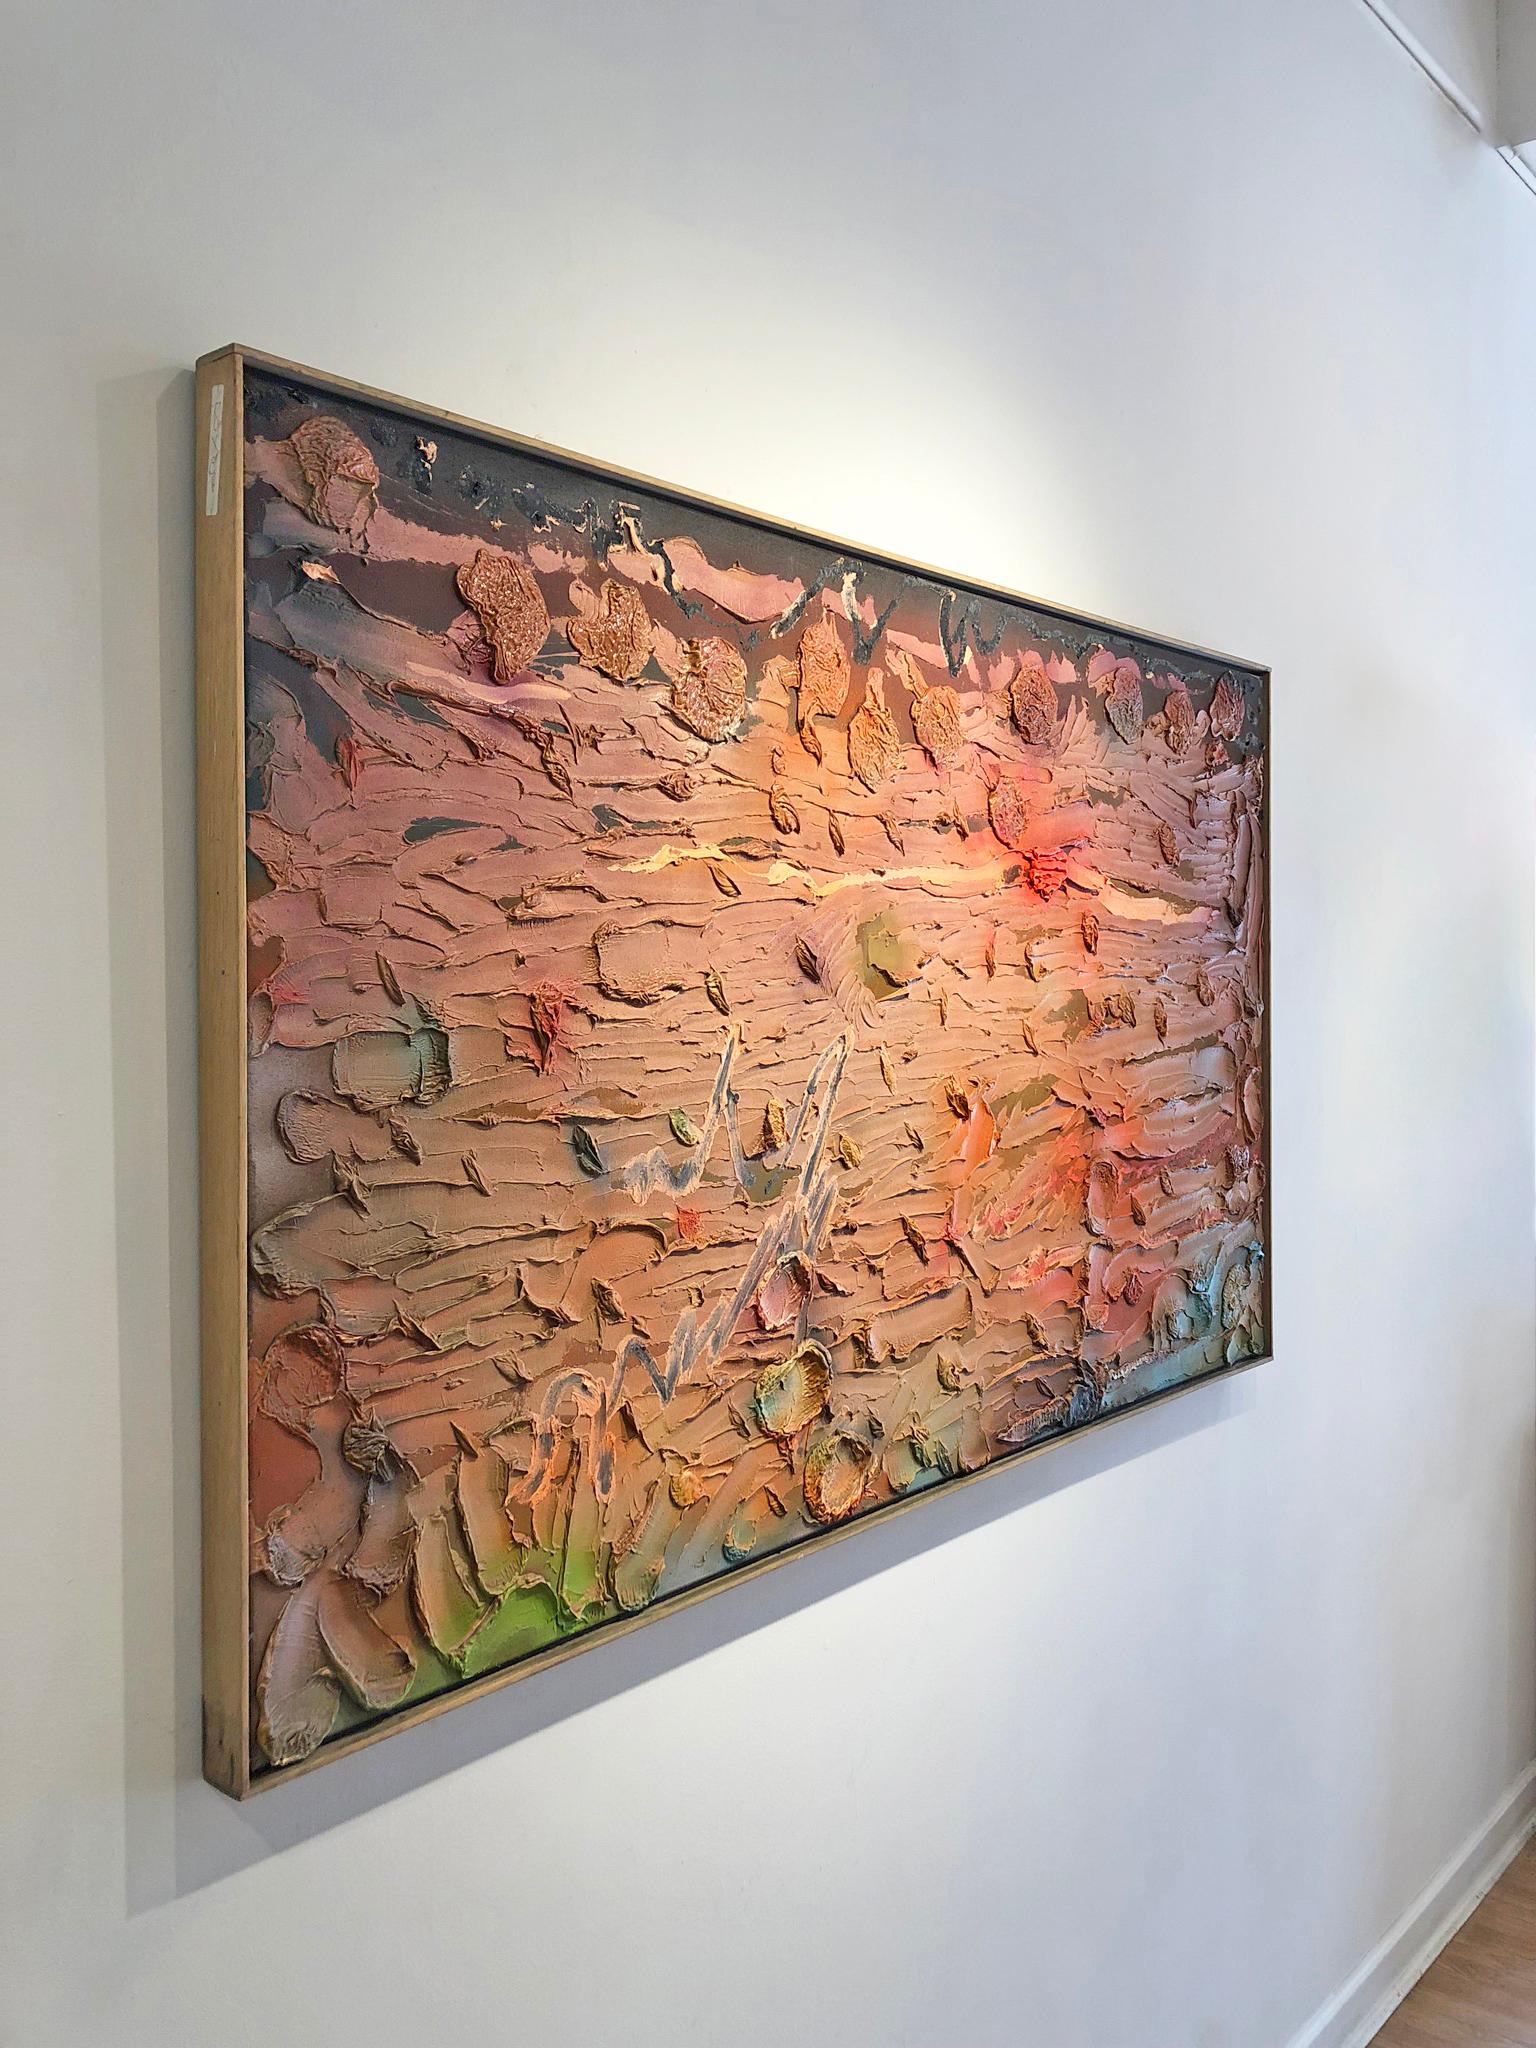 'Hotjoustatdusk' by Stanley Boxer, 1985. Oil on linen, 38 x 65 in./ Frame: 39.25 x 66 in. This impasto painting has an active surface that is thickly painted with defined brush strokes in a color palette of orange, green, brown, and black. Material